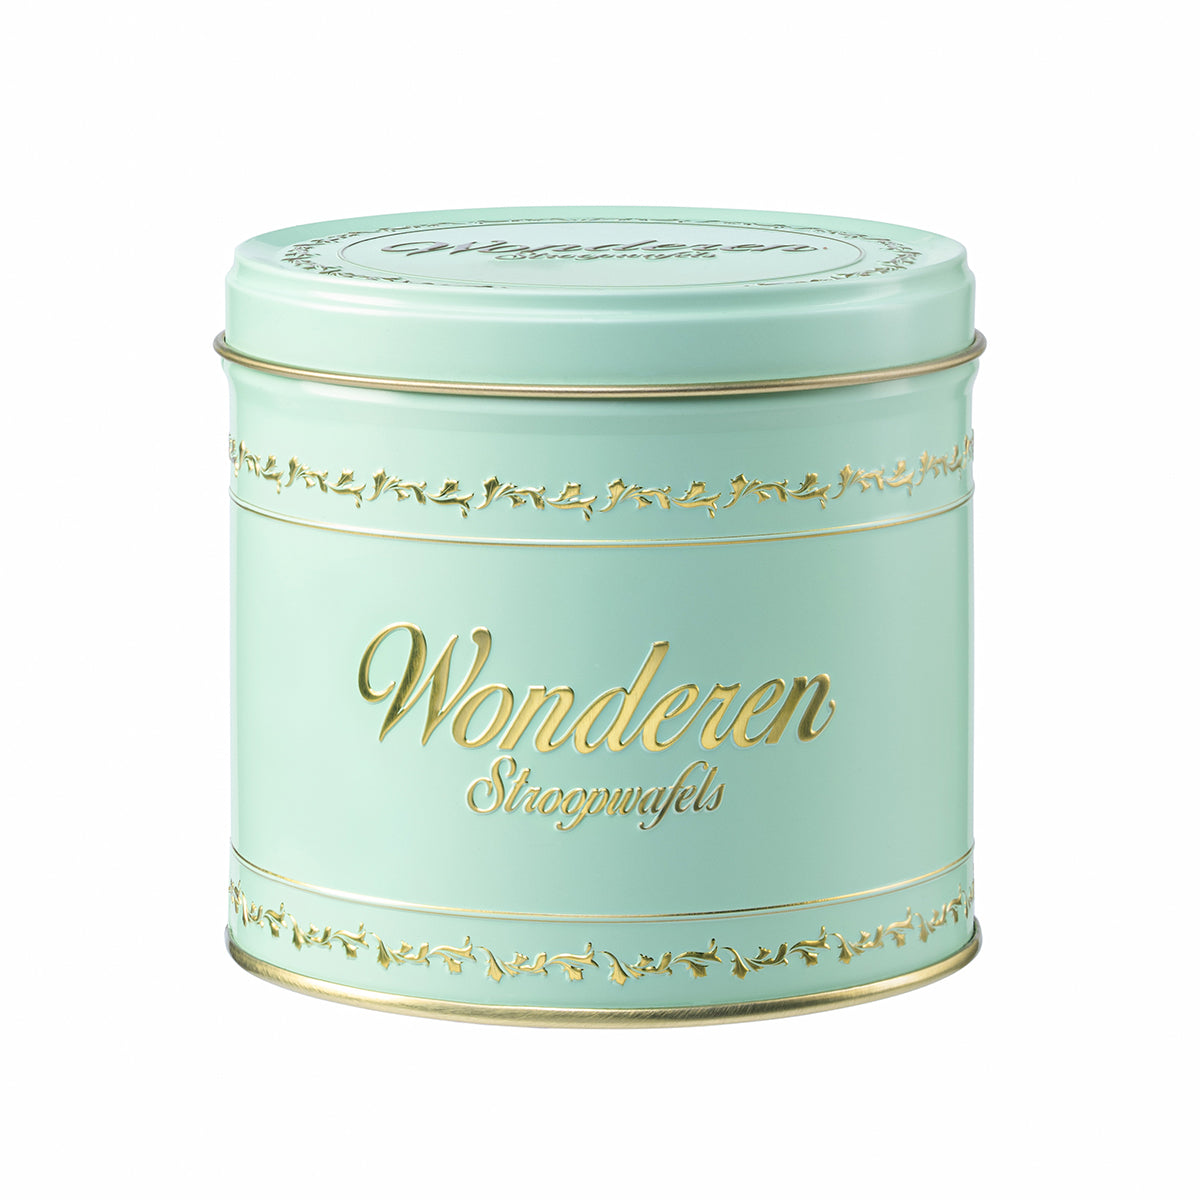 A mint green tin with the word Wonderen Stroopwafels on it.